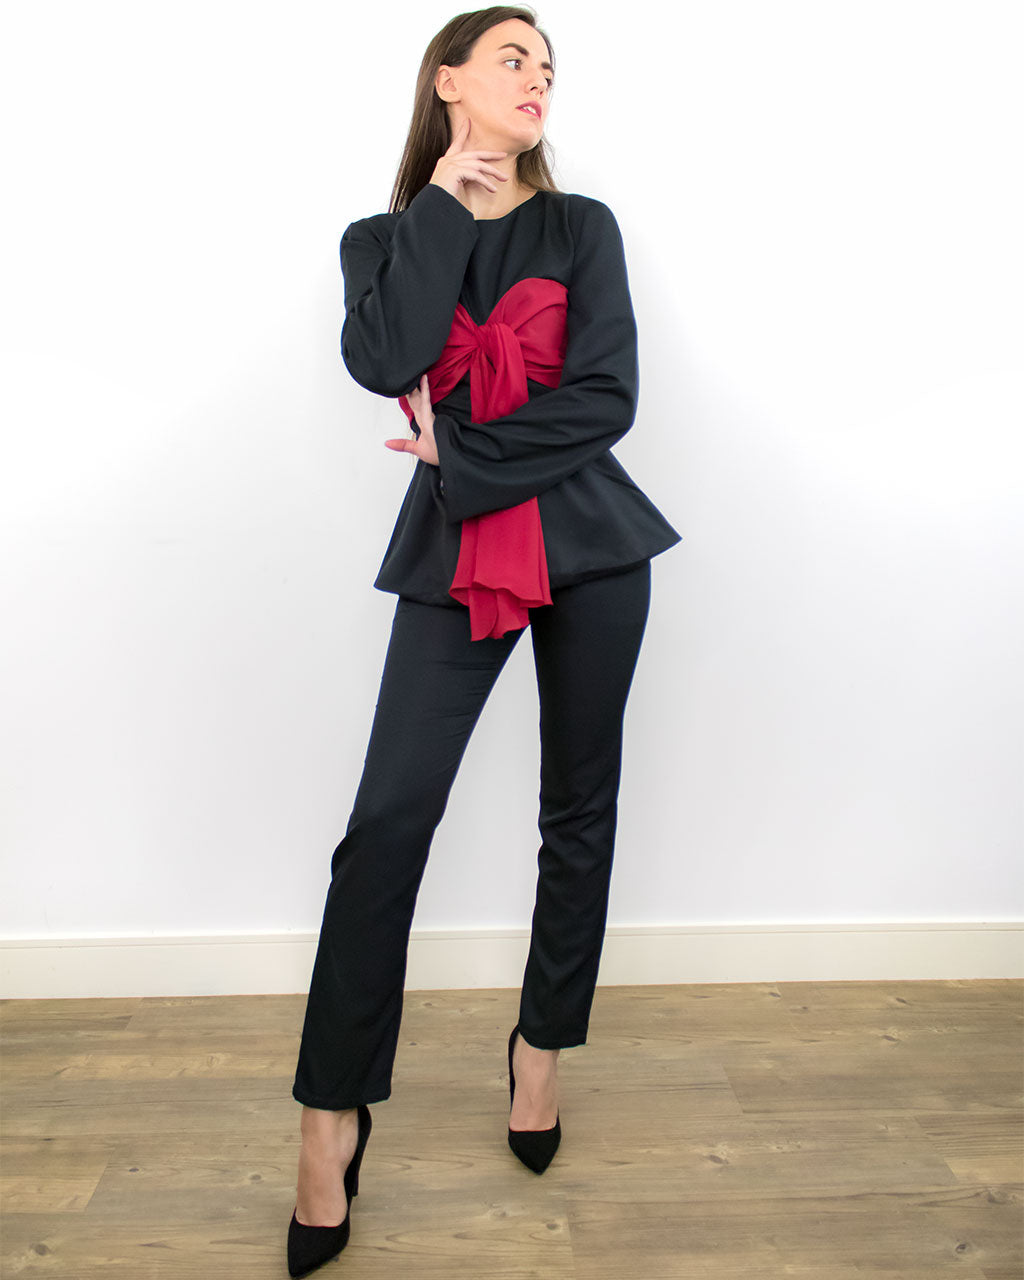 Annes Black Peplum Blouse with Bow